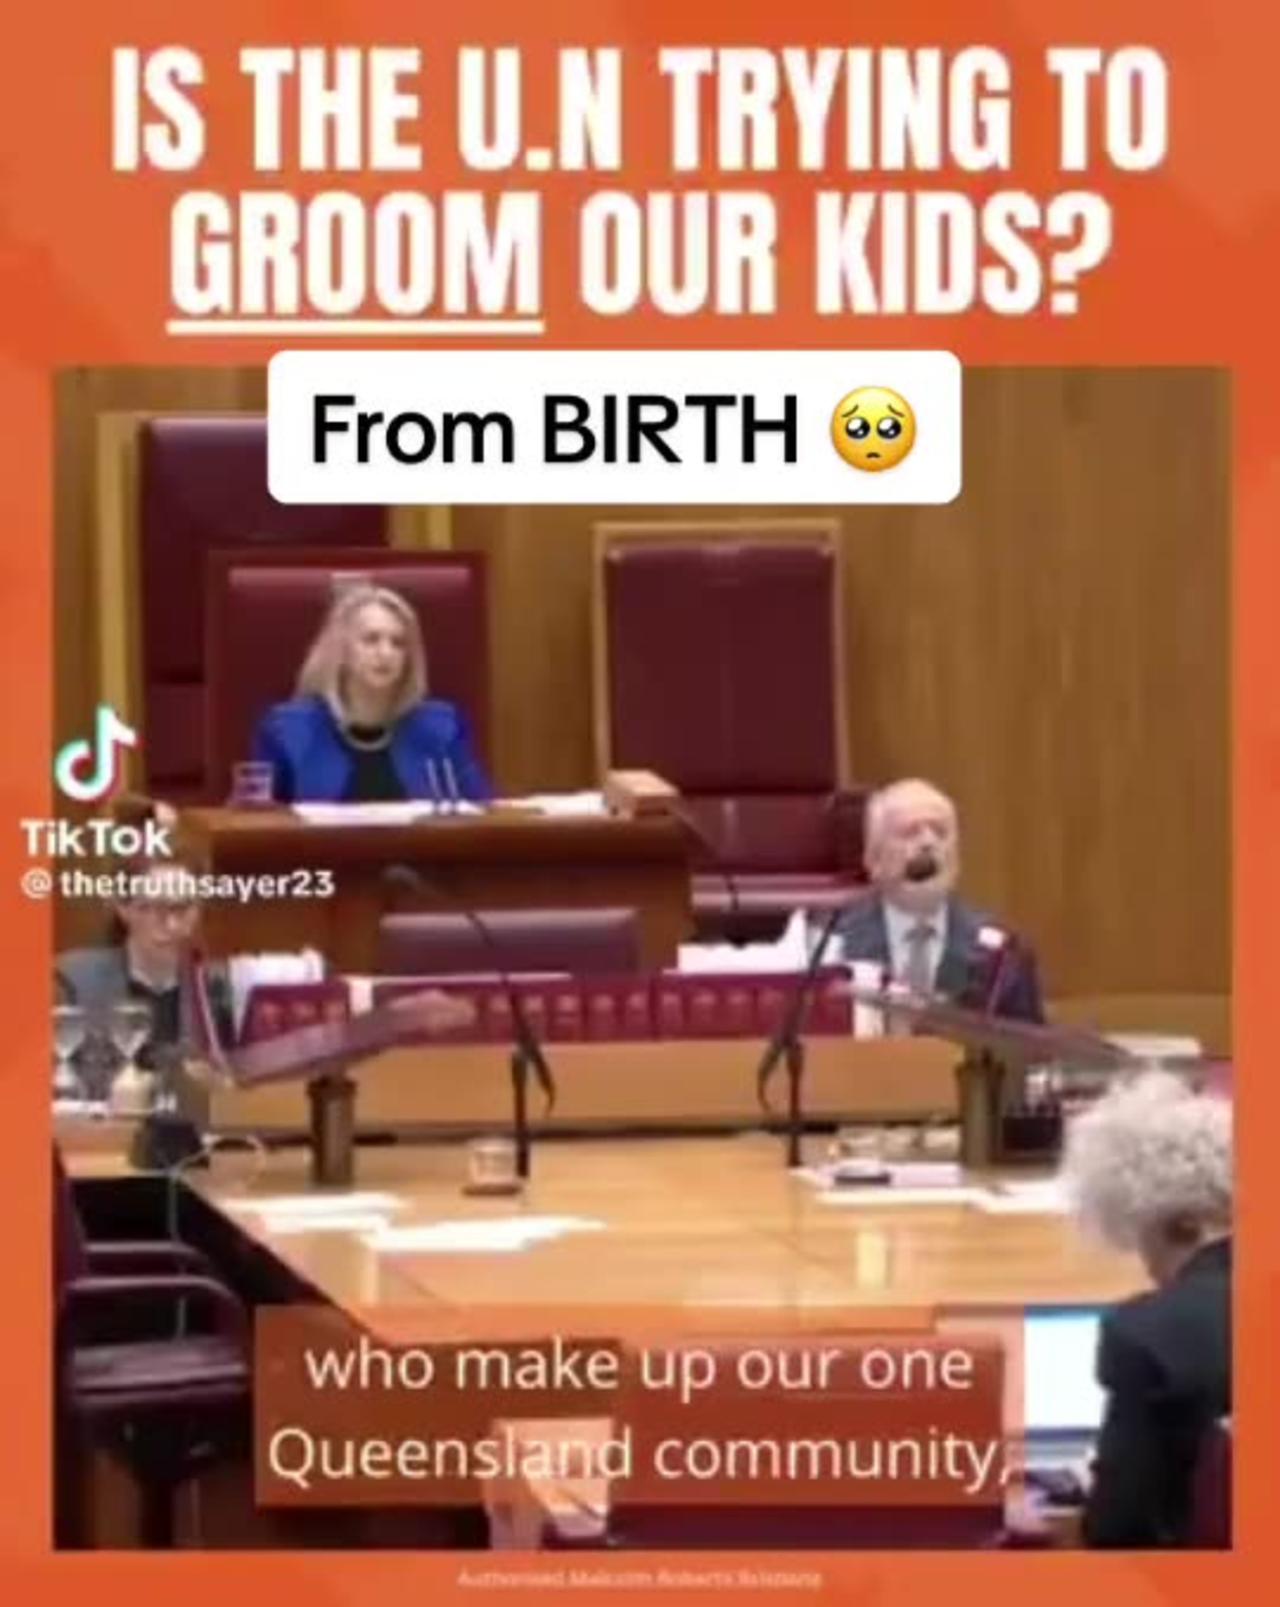 The grooming of children through Globalists pervert paradise!